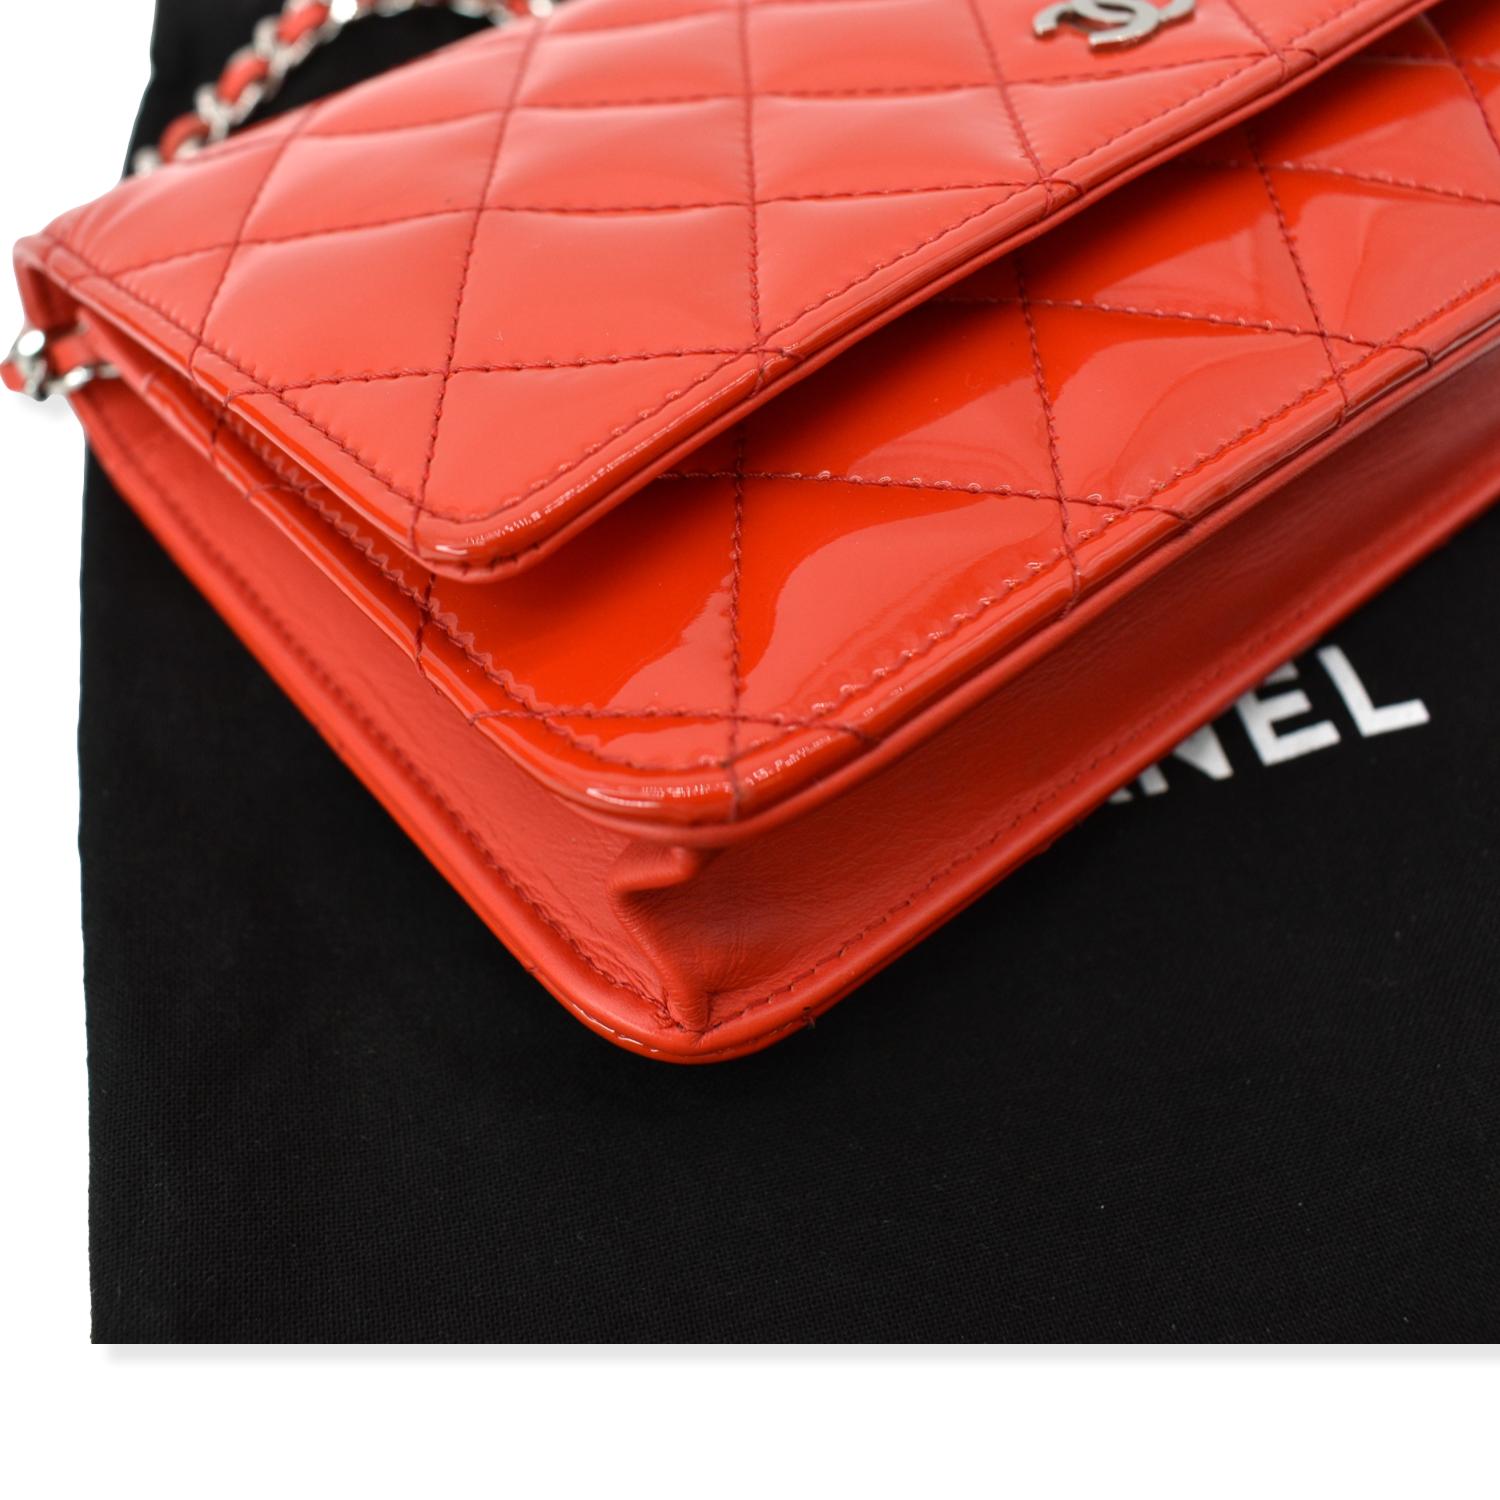 Chanel Classic Quilted WOC